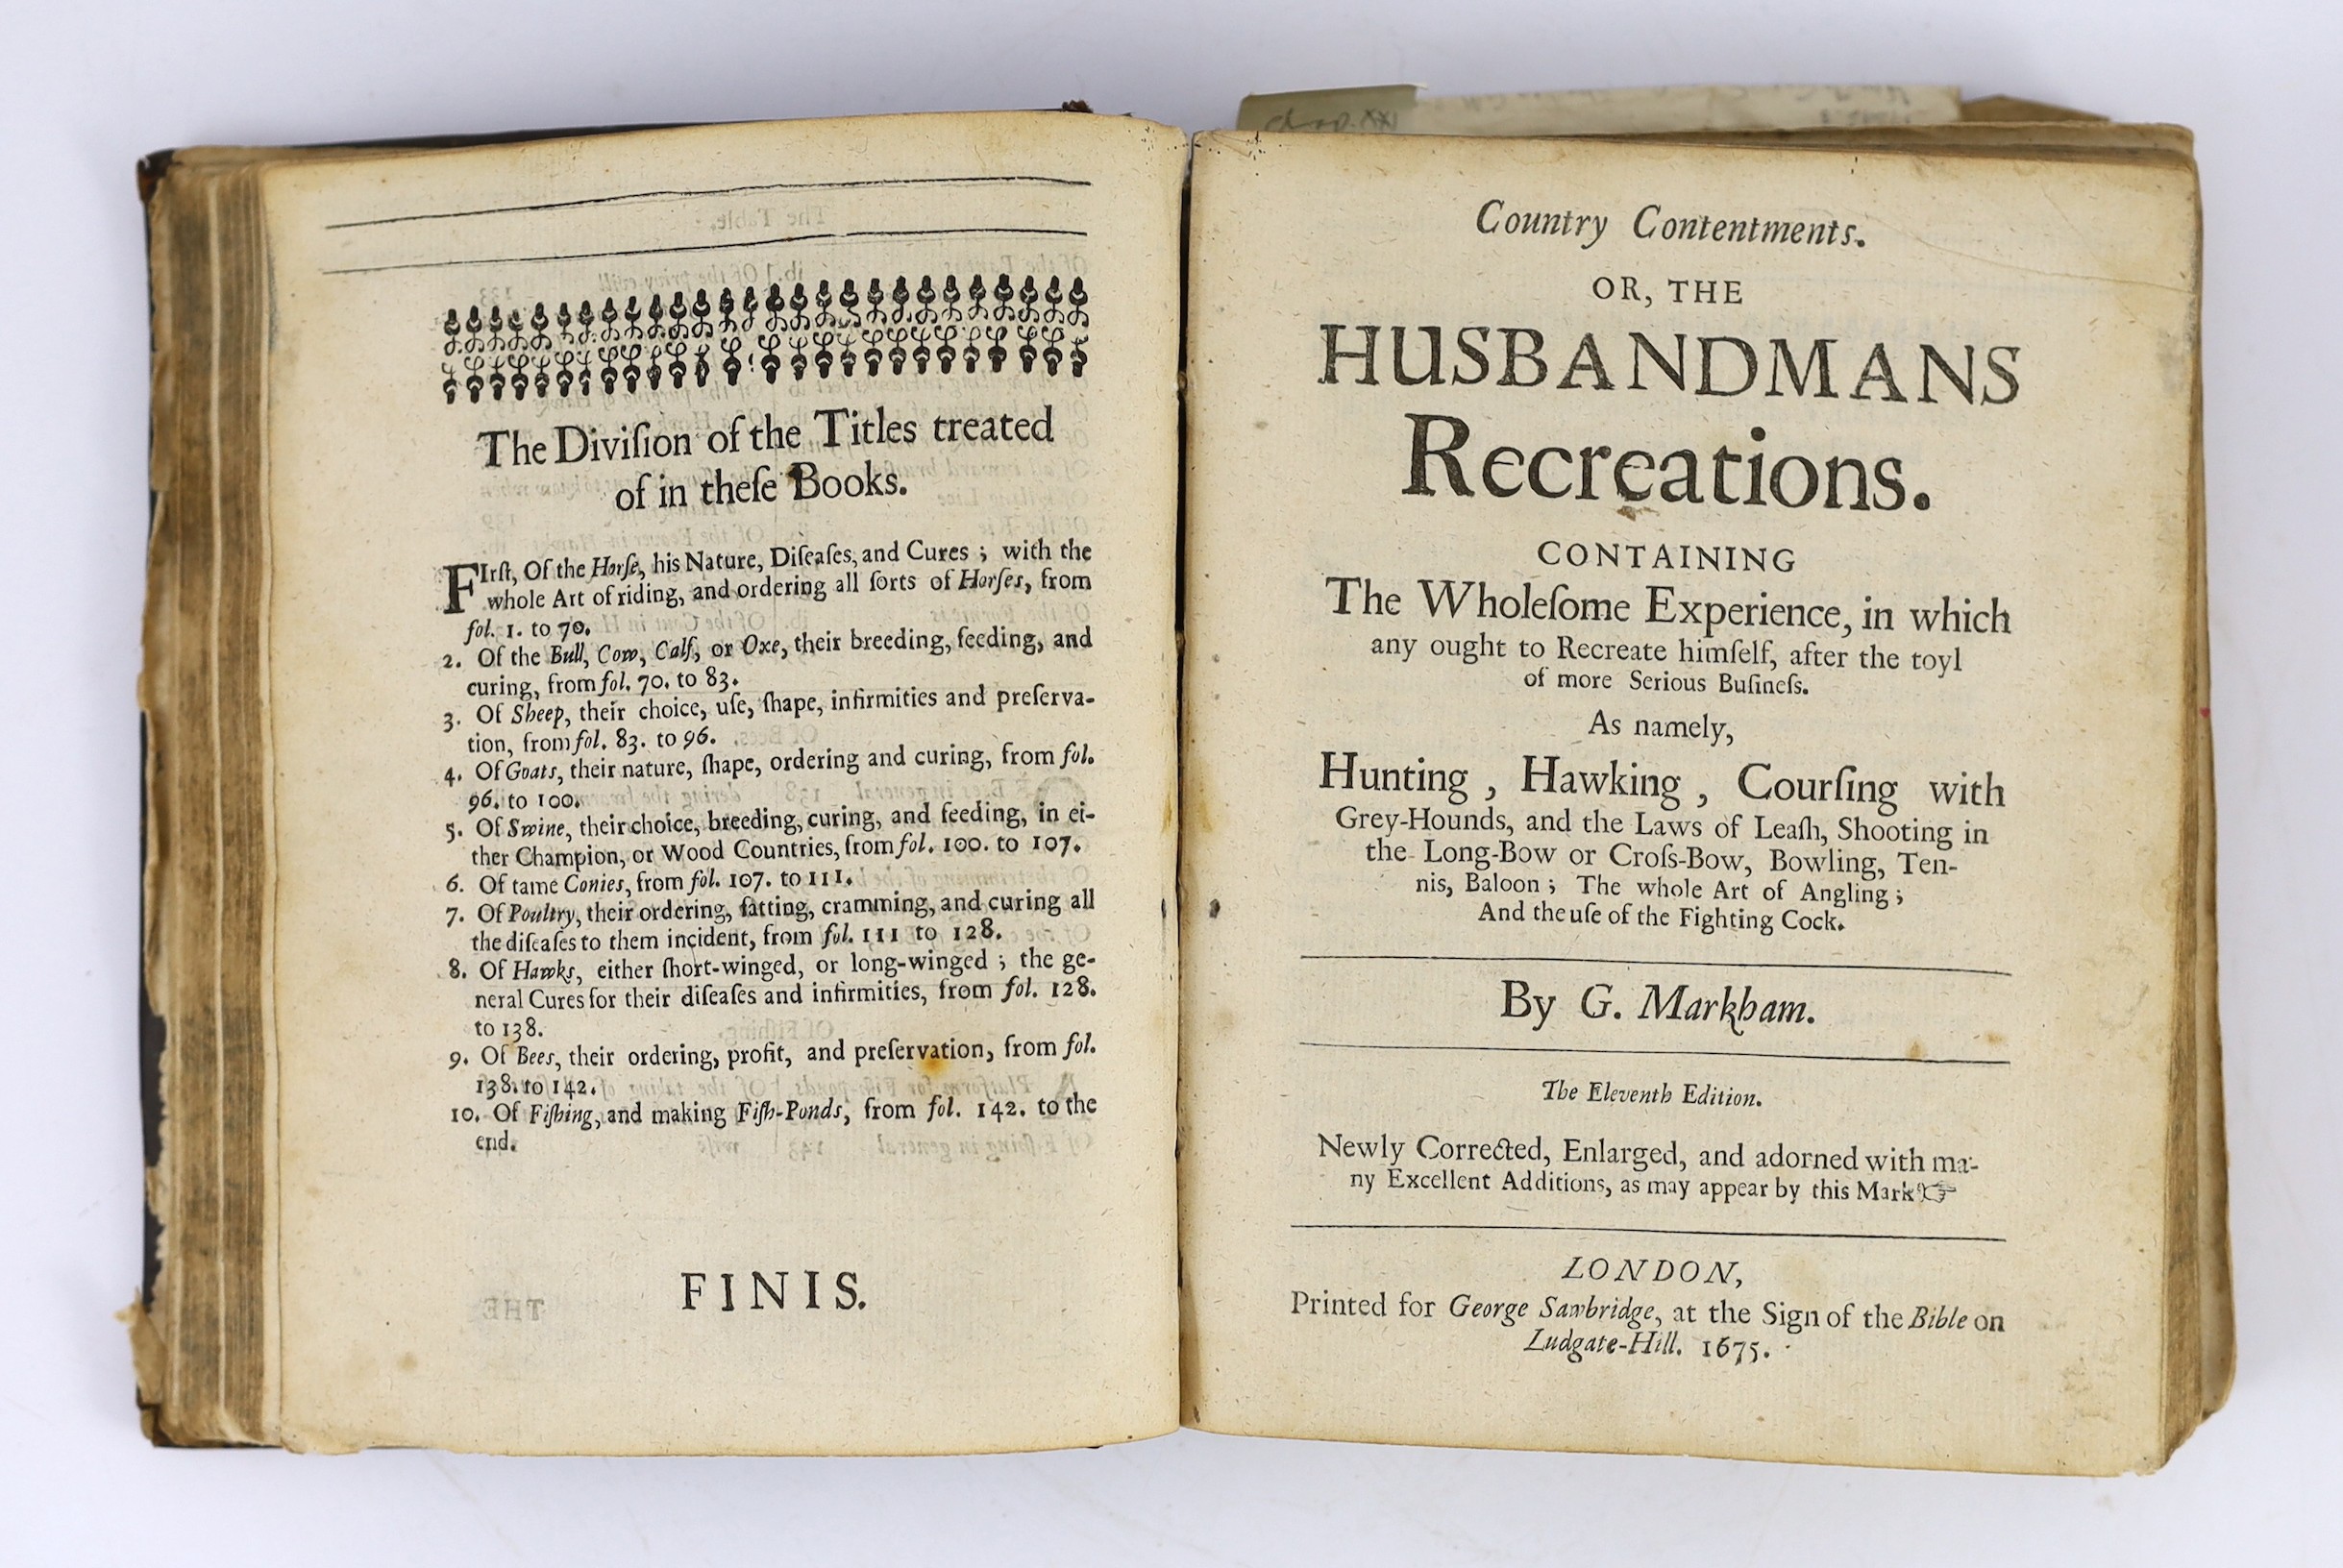 Markham, Gervase, A Way to Get Wealth. Containing Six Principal Vocations, or Callings...the thirteenth time corrected, and augmented by the author. Some engraved text illus. and headpiece decorations; old calf with pane